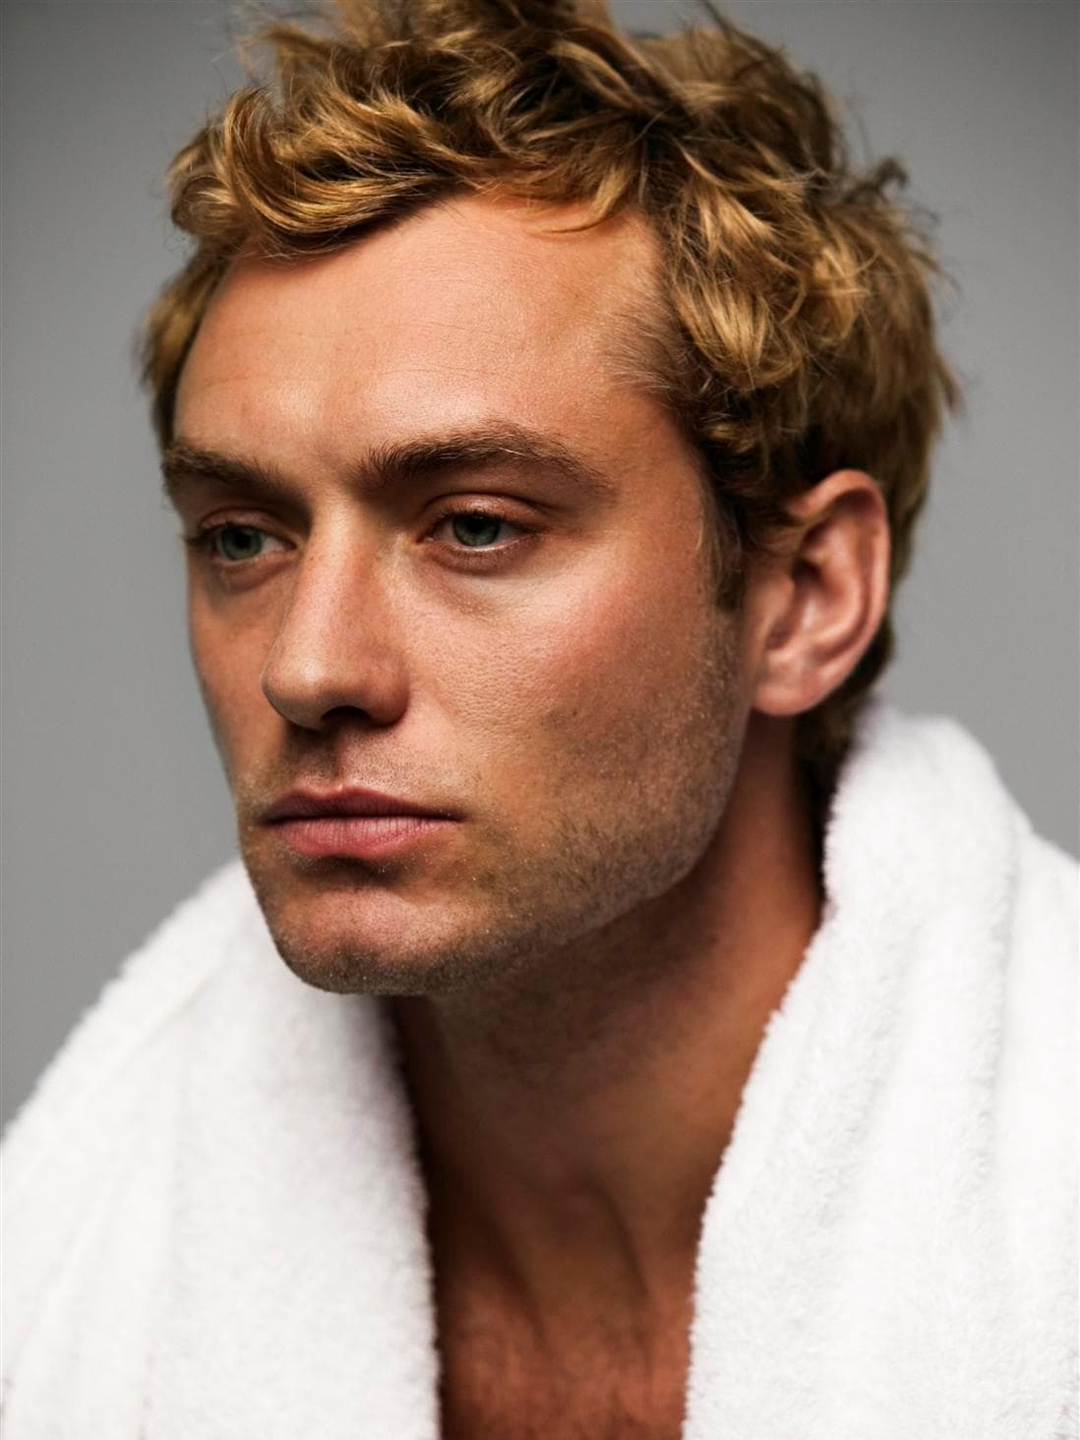 Jude Law in his youth